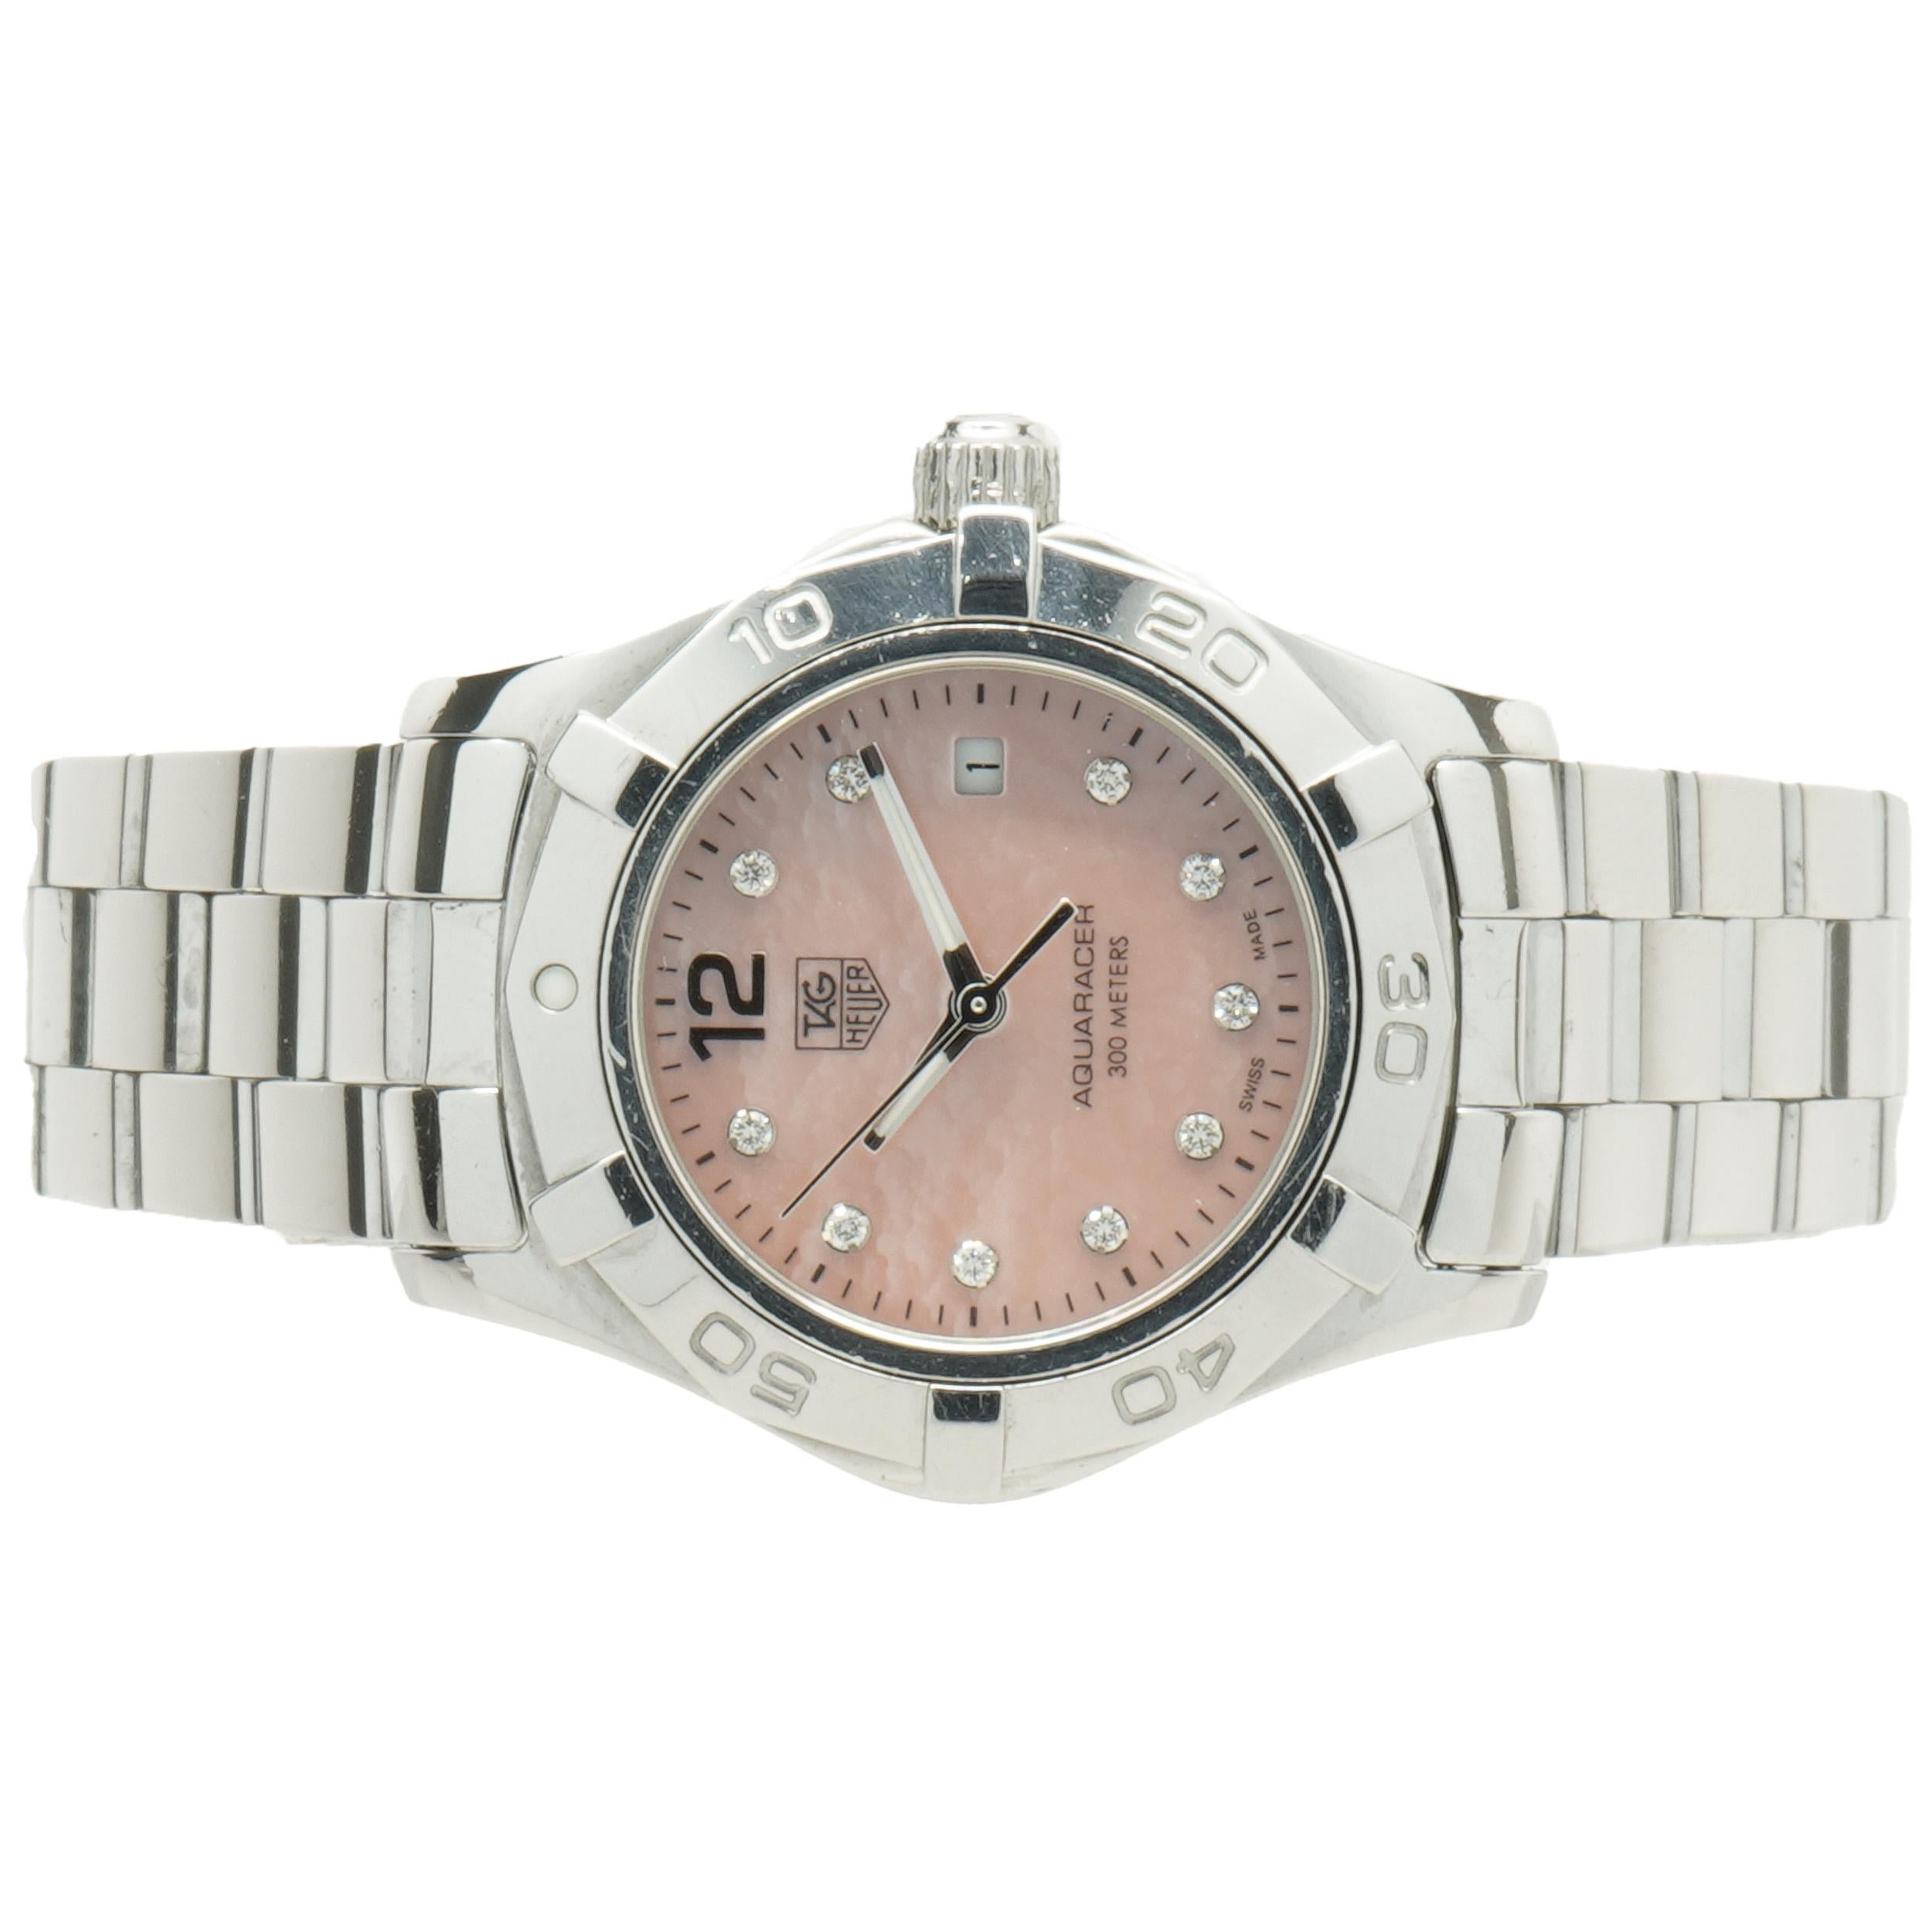 Movement: quartz
Function: hours, minuets, seconds, date
Case: 27mm stainless steel case,  timing bezel
Dial: pink mother of pearl, diamond markers
Band: stainless steel bracelet, integrated clasp
Serial#: RWX8xxx
Reference#: WAF141A

Complete with